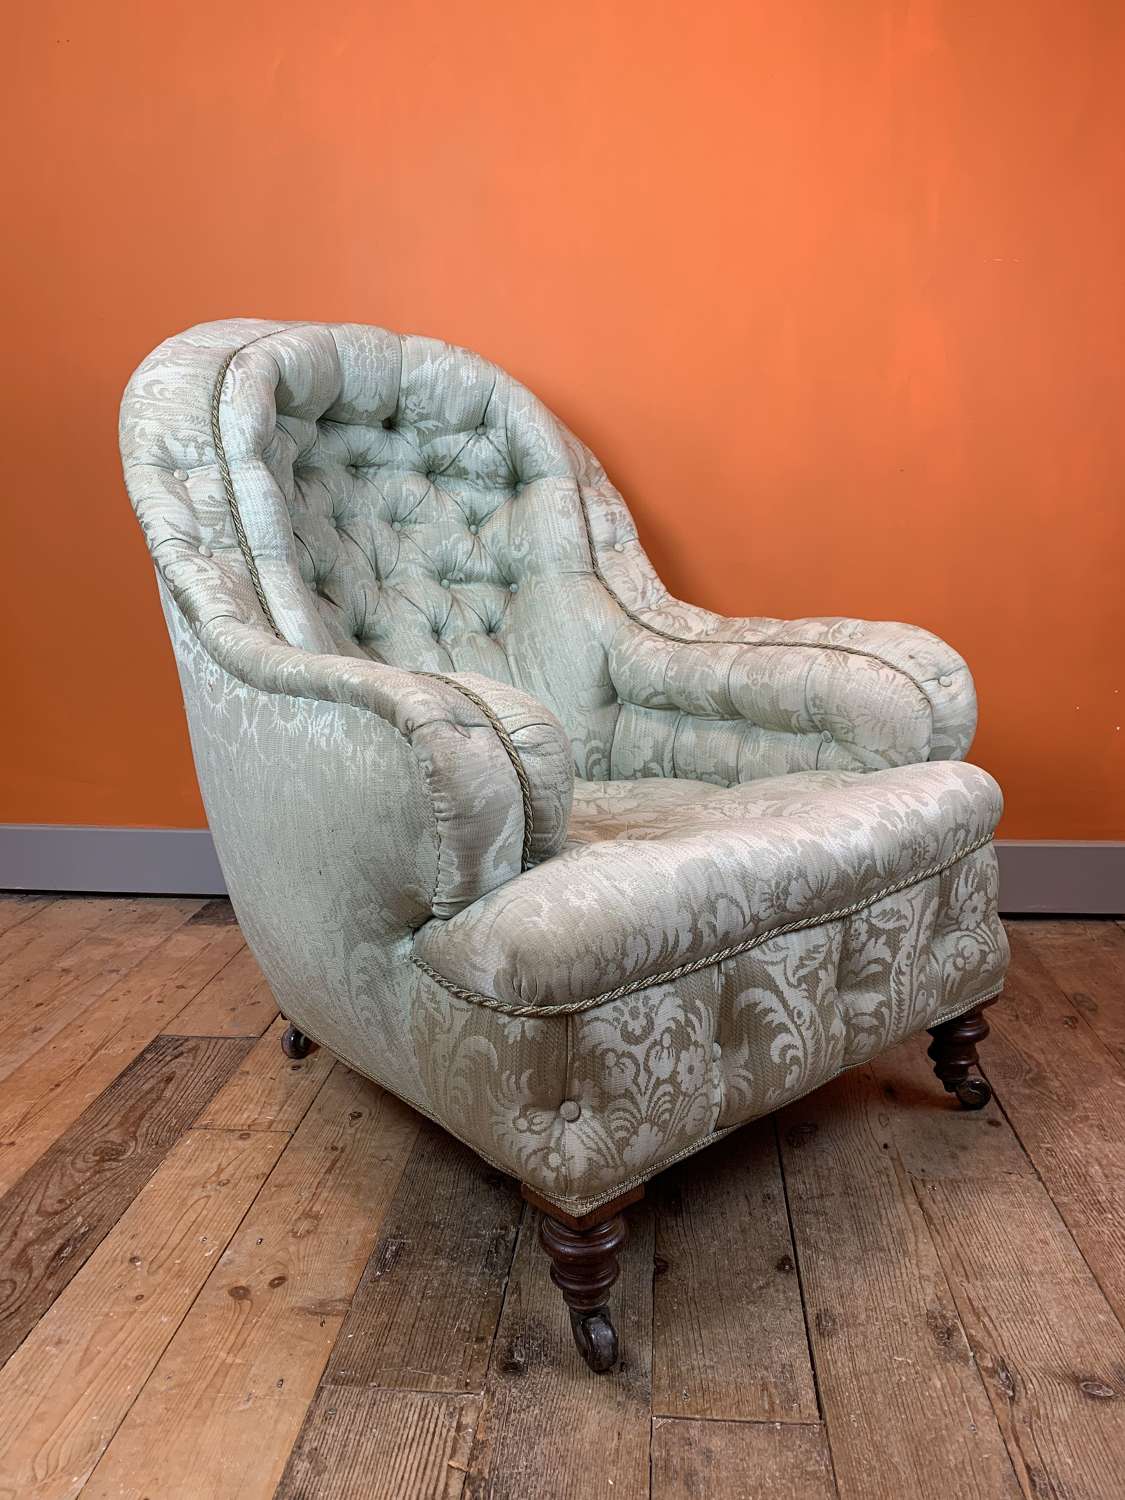 Unusual Victorian Buttoned Armchair by Cornelius V Smith